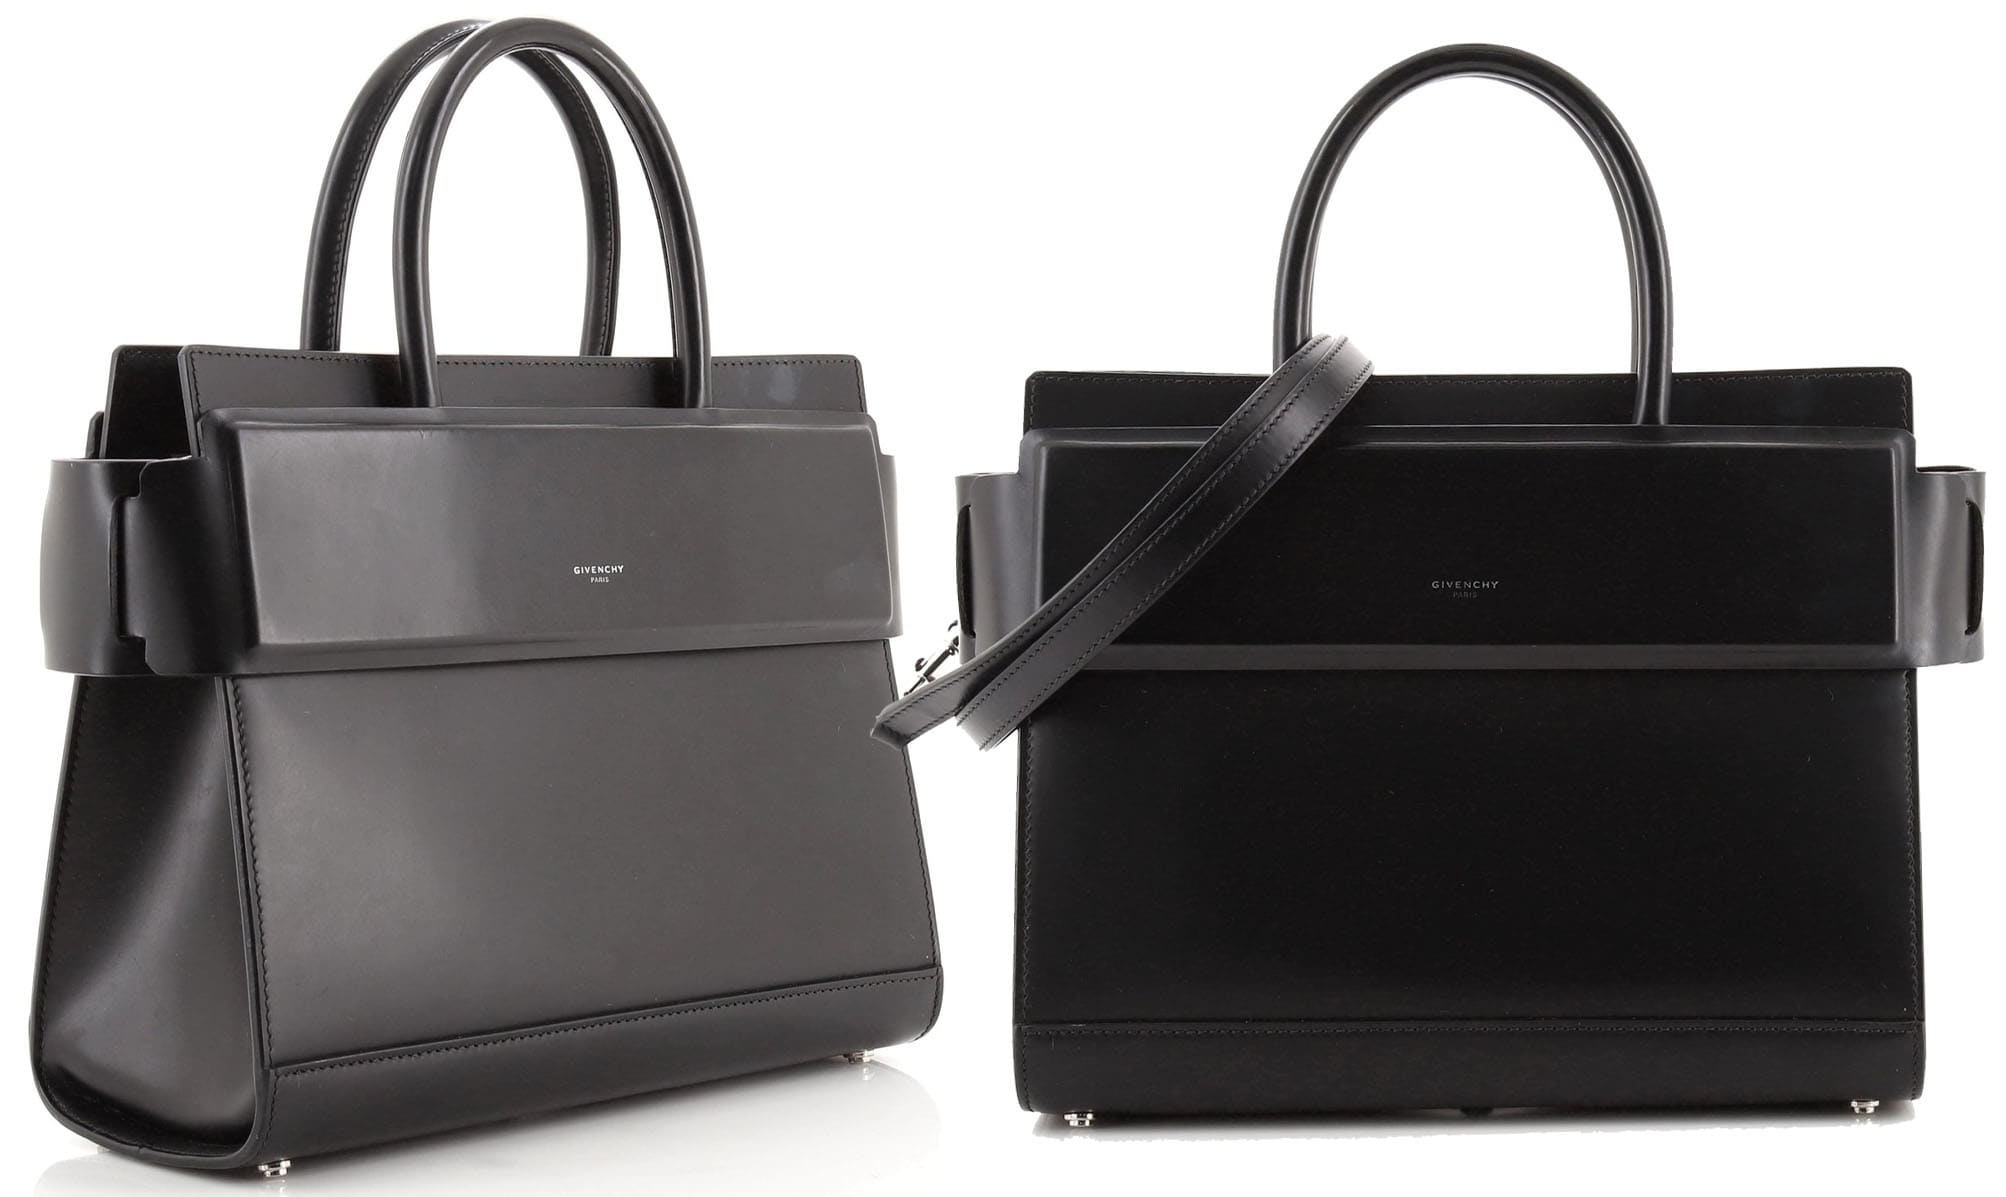 A structured satchel, the Givenchy Horizon features a timeless silhouette with two top handles and a minimalist Givenchy logo